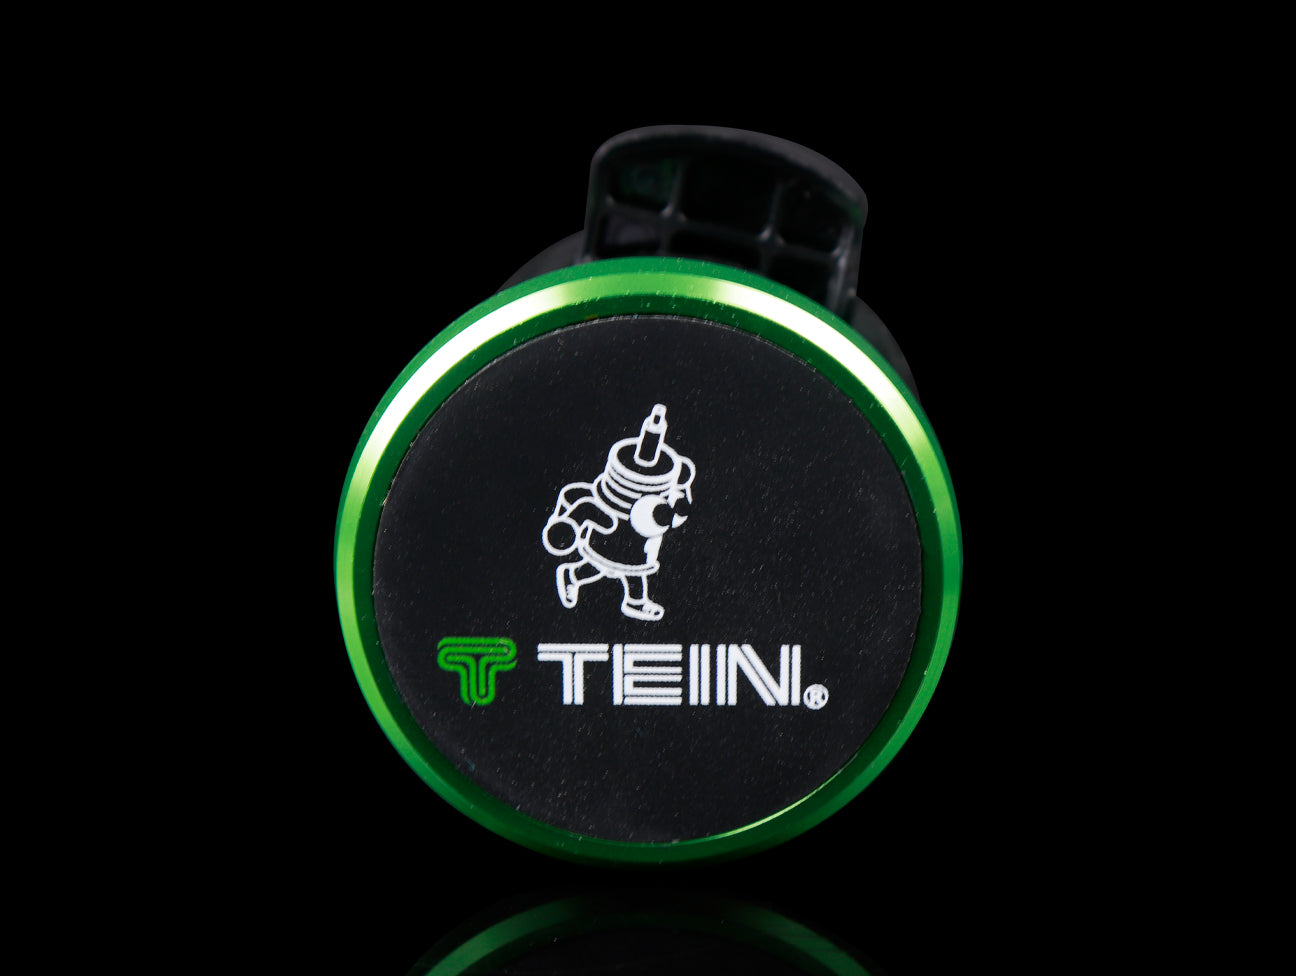 Tein Magnetic Cell Phone Holder